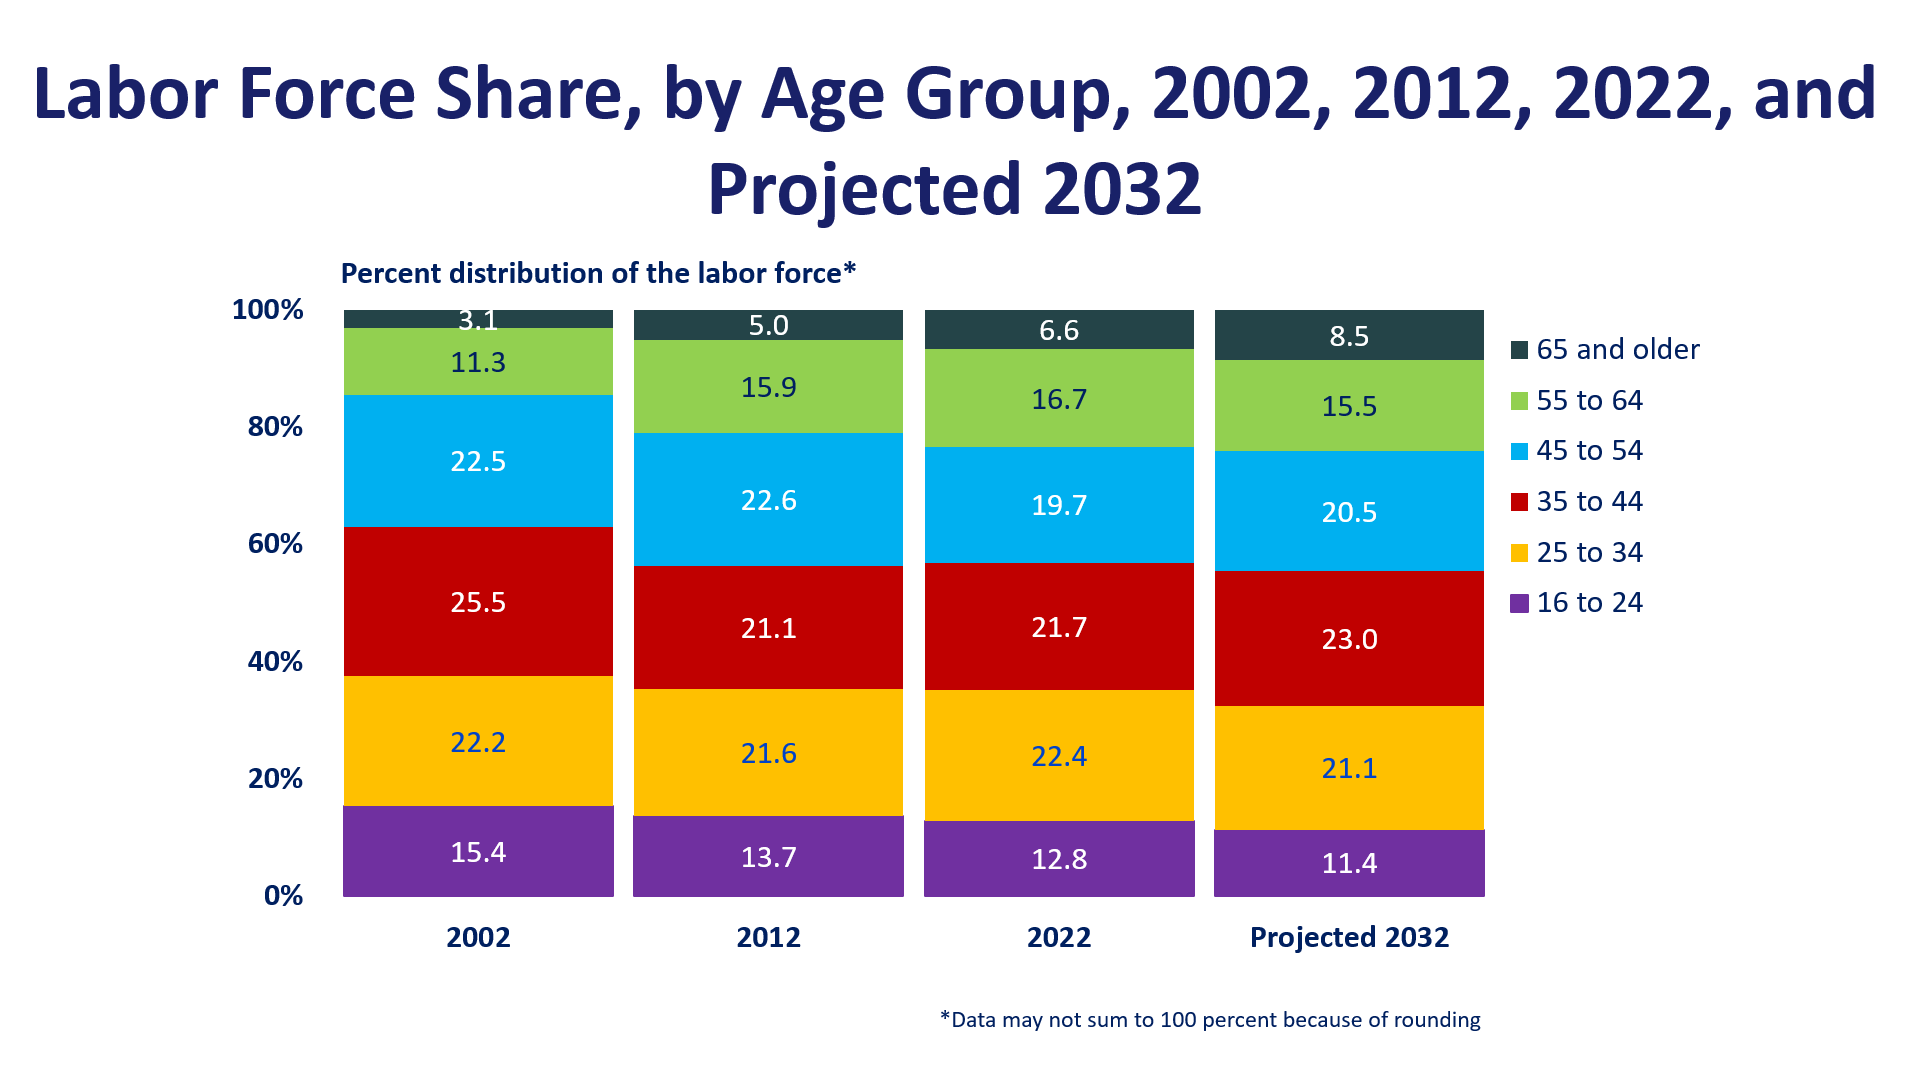 Labor force share, by age group, 2002, 2012, 2022, and projected 2032